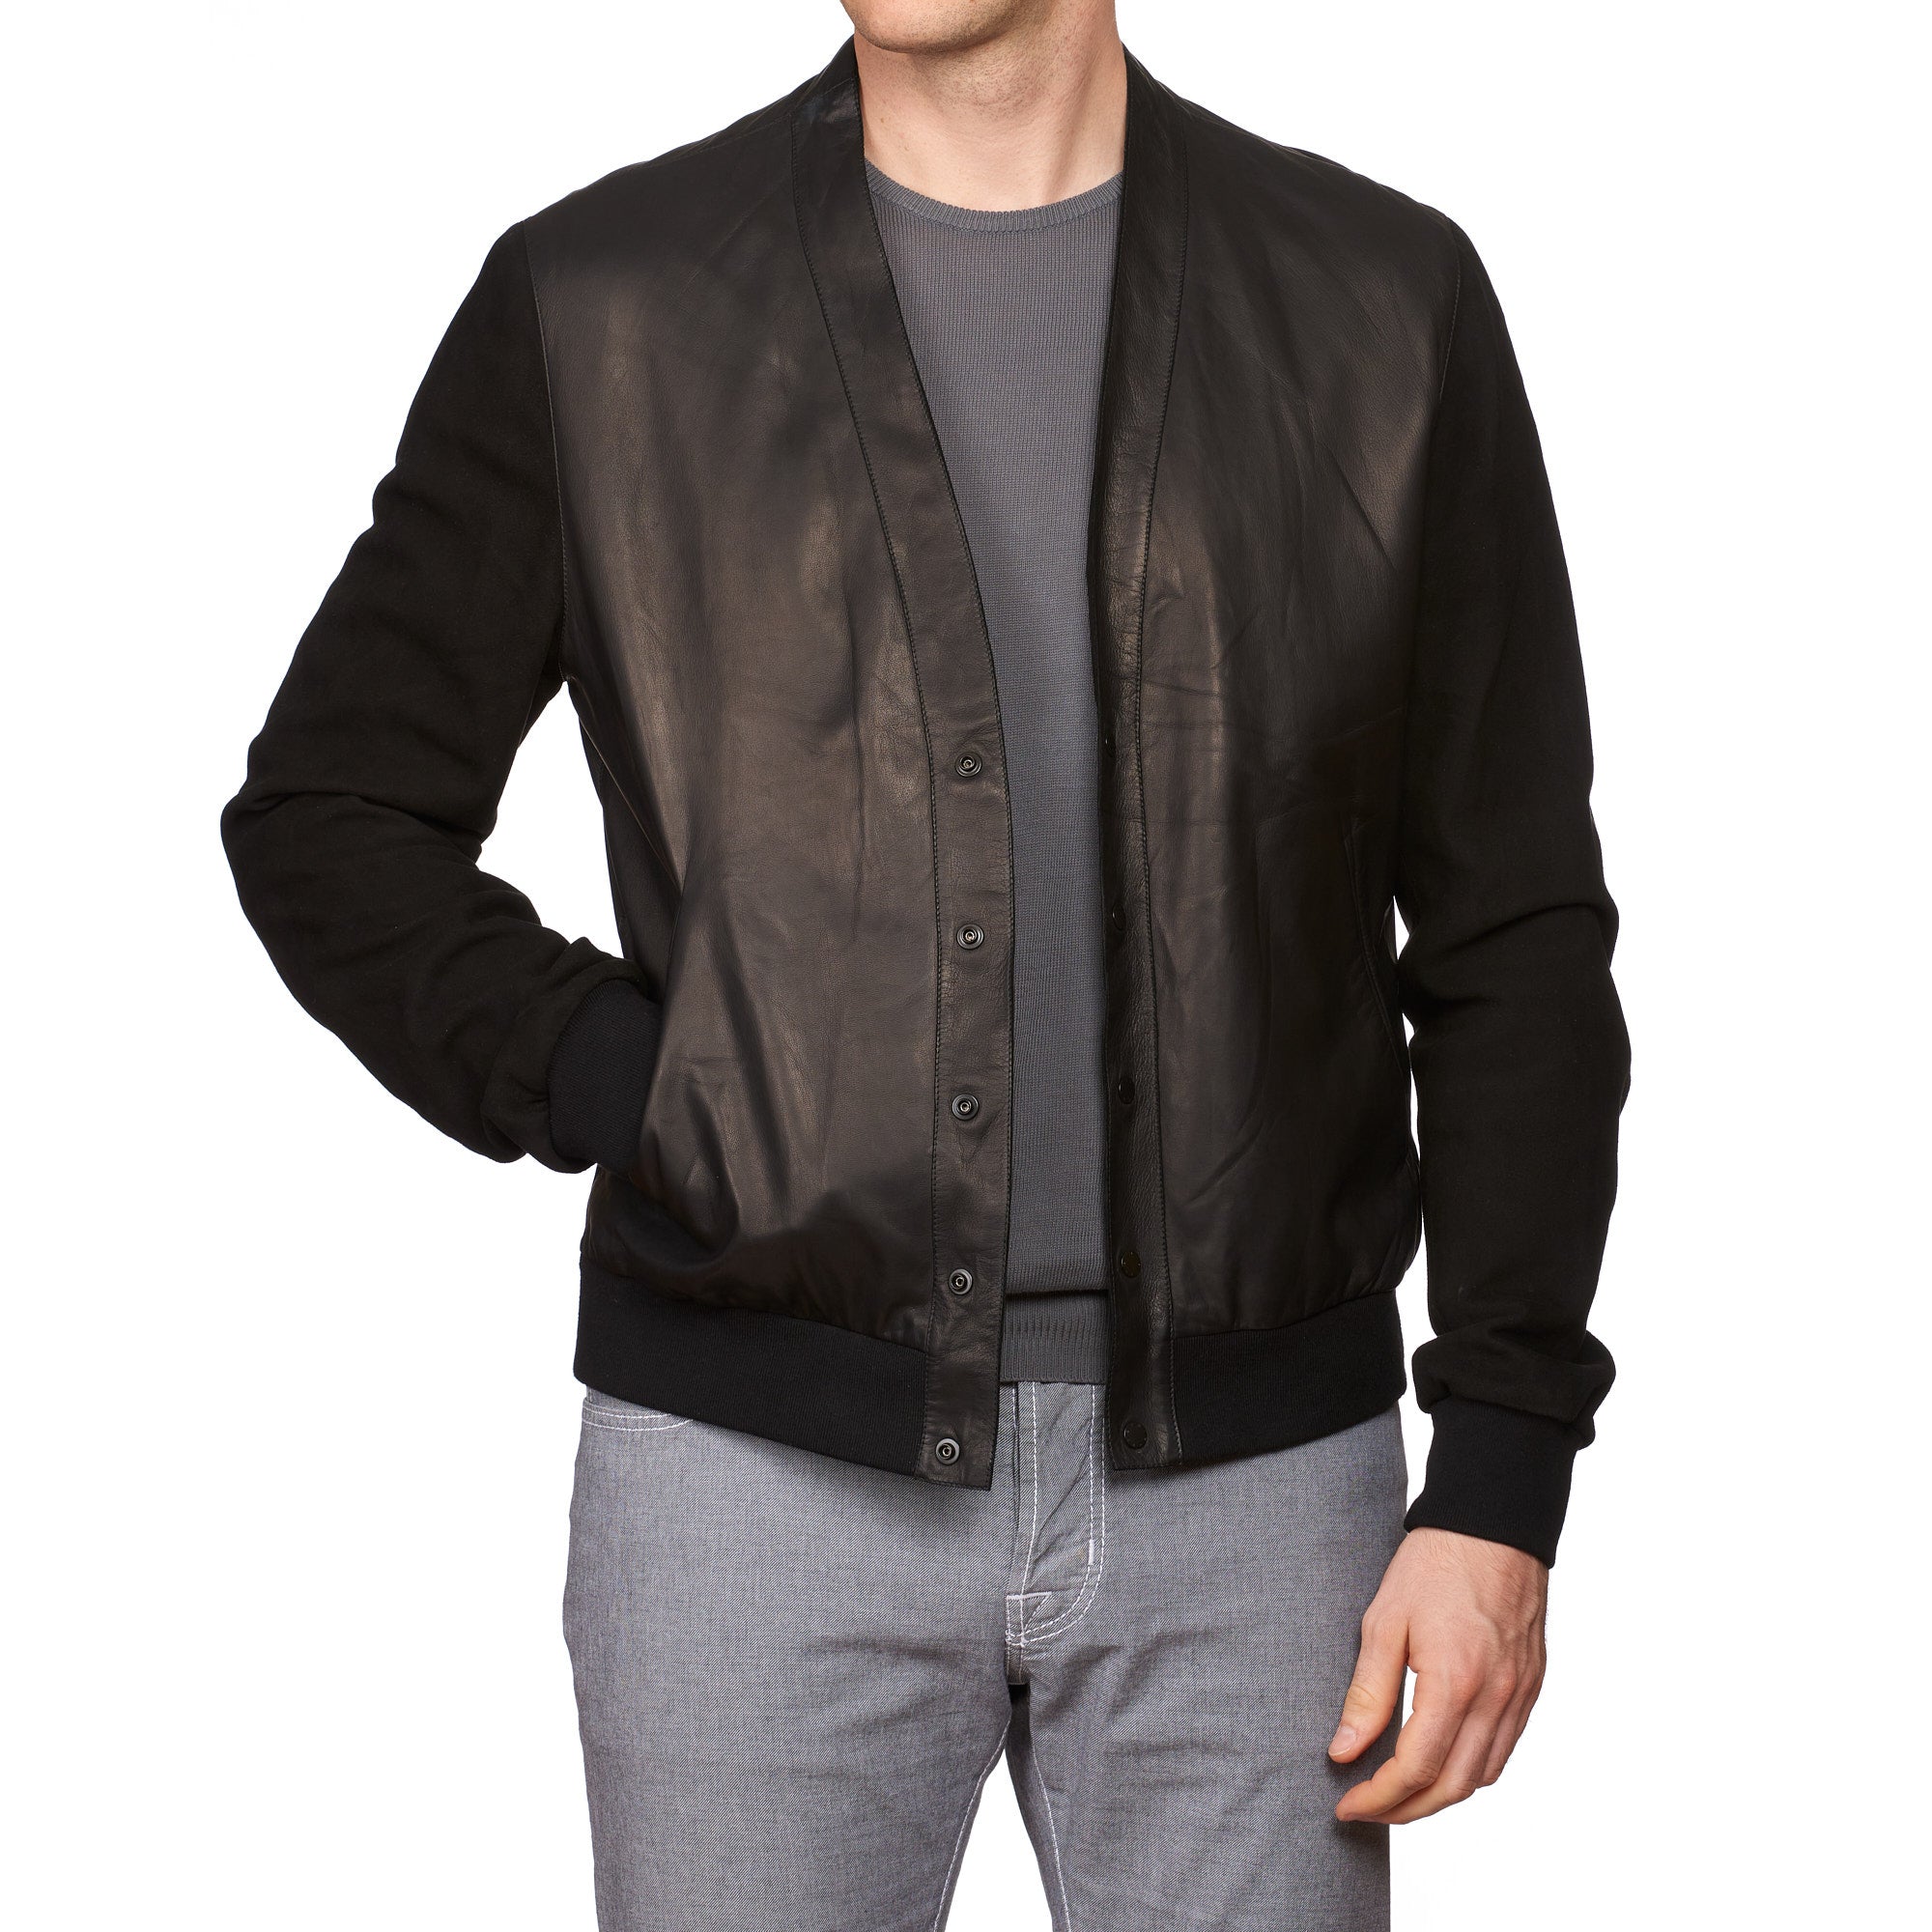 SERAPHIN Black Lamb Nappa & Suede Leather Unlined Cardigan Jacket Blouson FR 52 US L NEW SERAPHIN